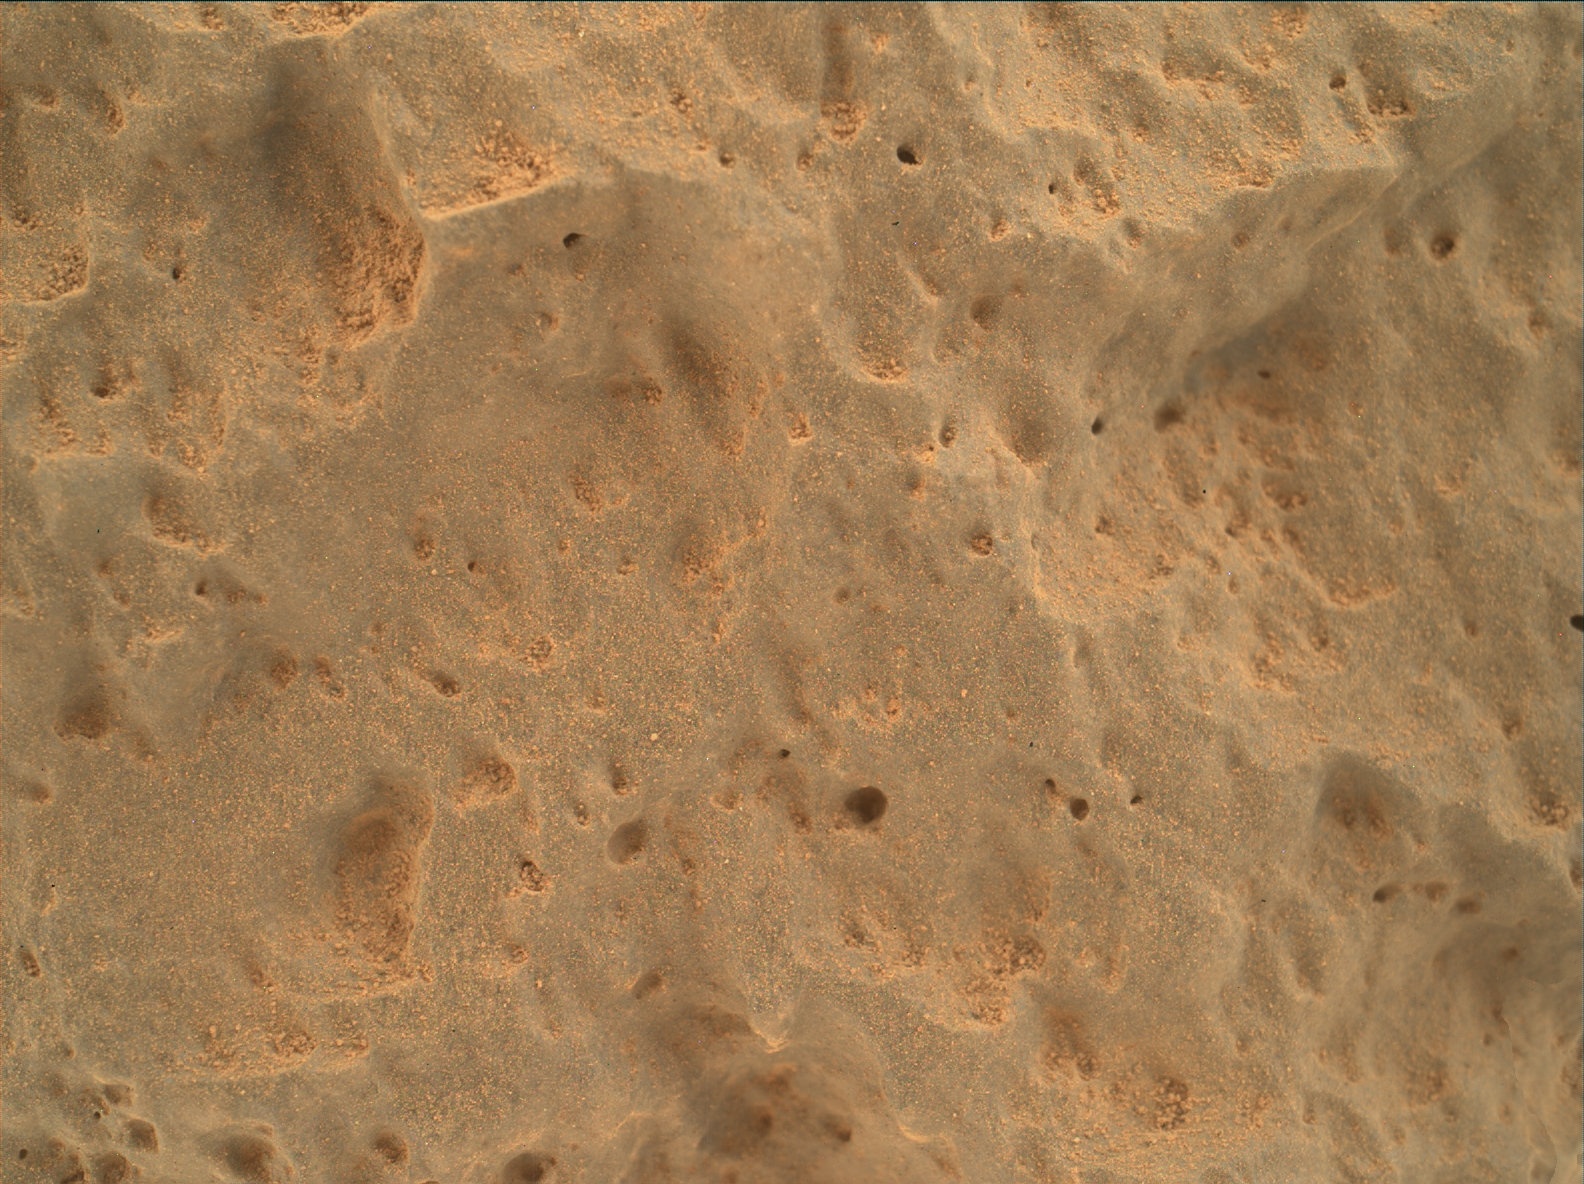 Nasa's Mars rover Curiosity acquired this image using its Mars Hand Lens Imager (MAHLI) on Sol 46